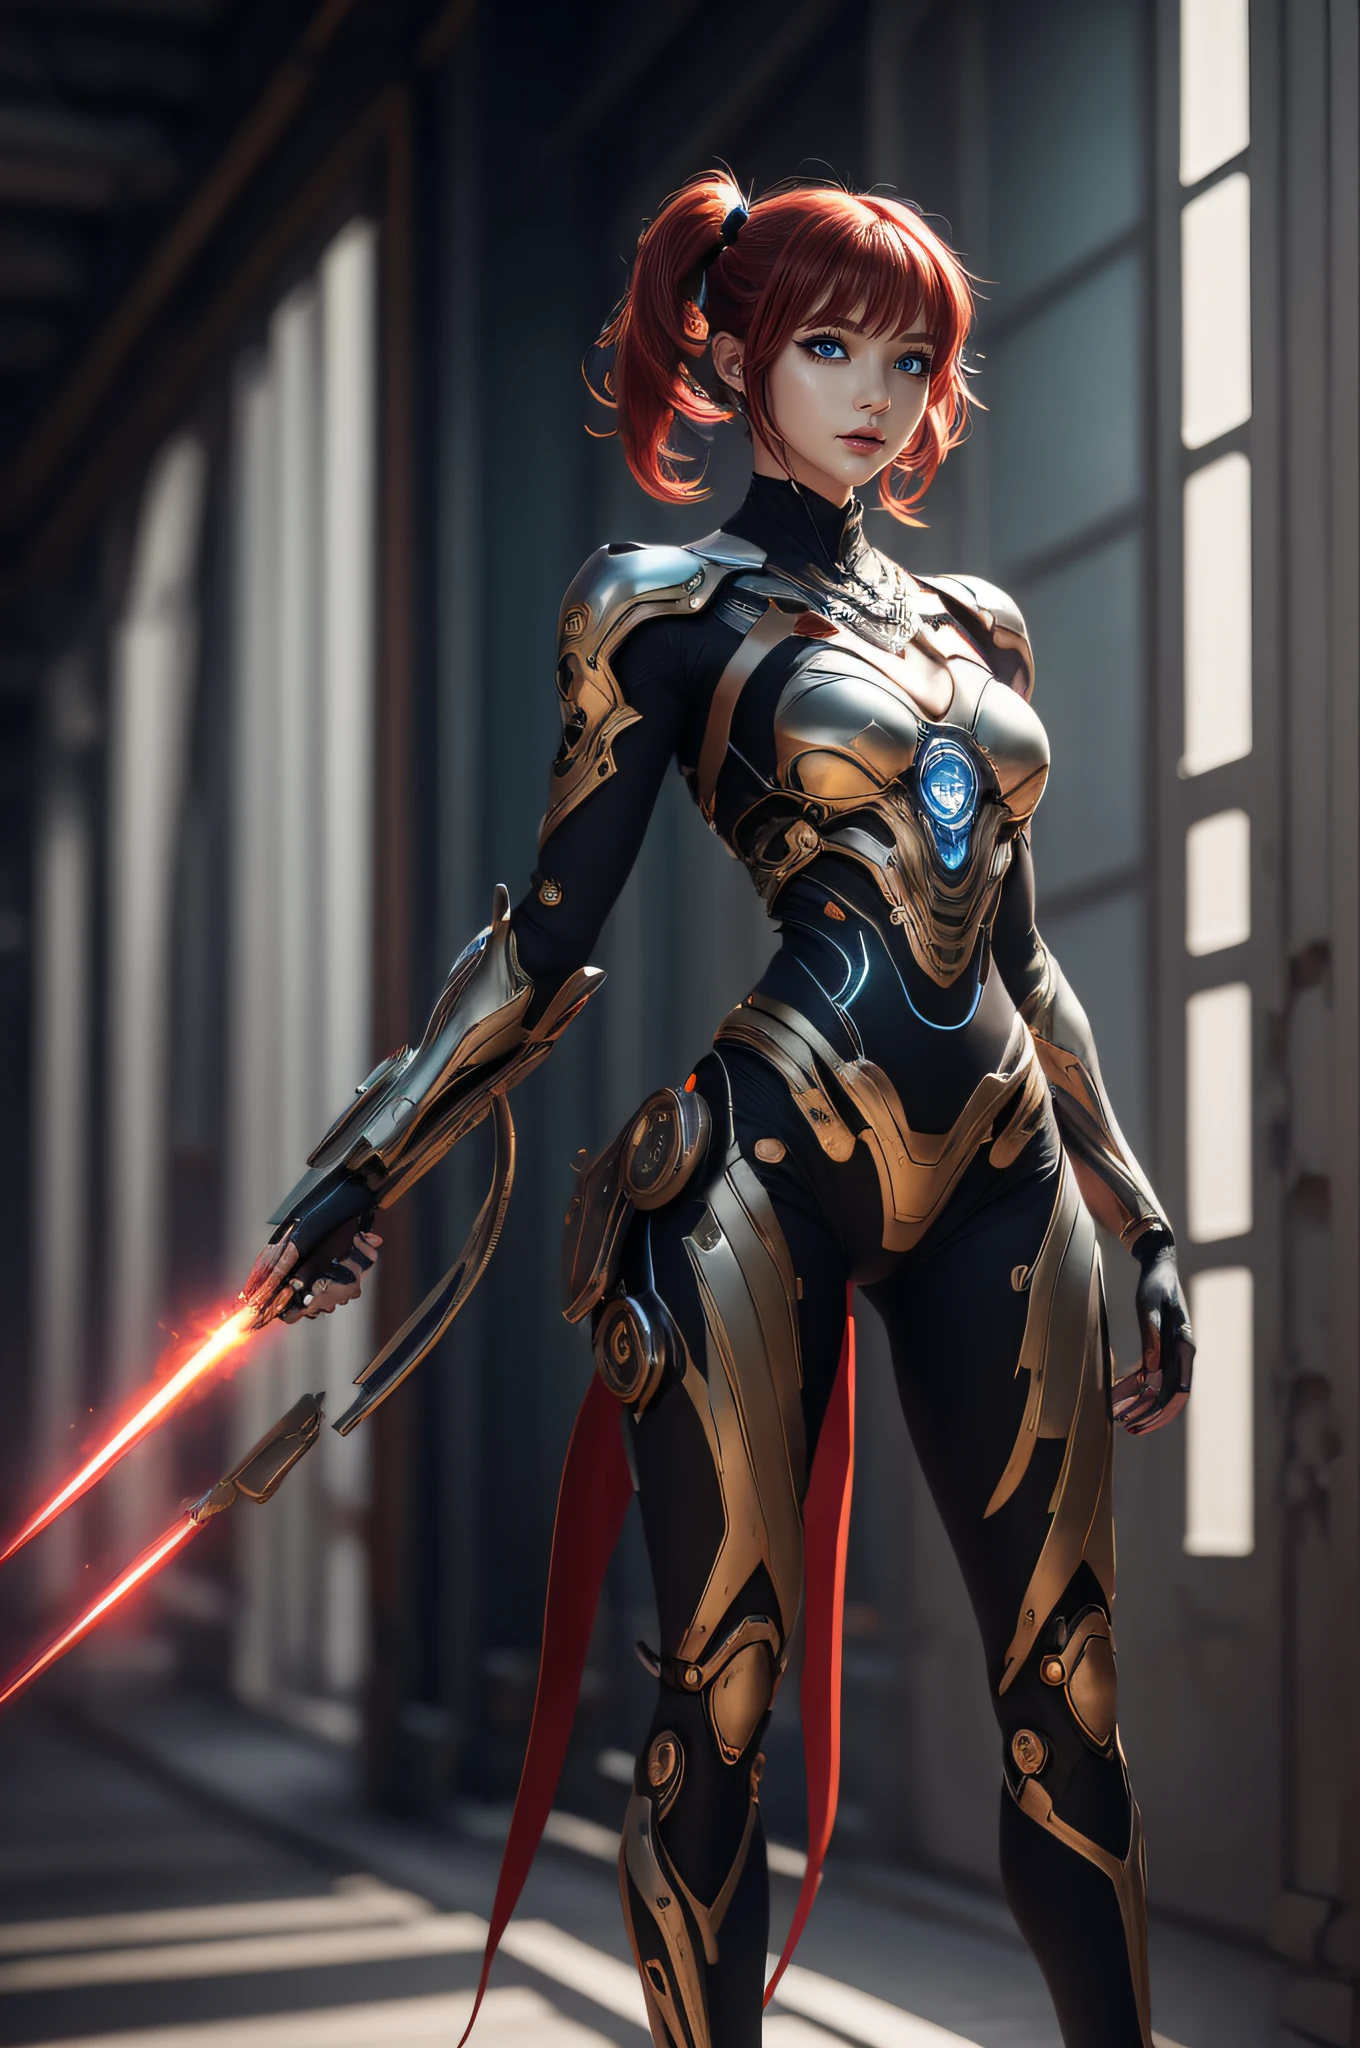 (((full body shot))), ((Top Quality, 16k, Masterpiece: 1.3)), photorealistic, extremely detailed CG unity 8k wallpaper, Depth of field, Cinematic Light, photorealistic, 3D, UHD, intense lighting, lens flare, woman in a futuristic outfit posing for a picture, cute cyborg girl, beutiful girl cyborg, beutiful white girl cyborg, cyborg girl, beautiful cyborg girl, perfect anime cyborg woman, beautiful digital artwork, perfect android girl, cyborg - girl, young lady cyborg, girl in mecha cyber armor, beautiful female android!, ((red glass)), (cutouts and slits throughout the outfit, eye-catching, tempting), (extremely beautiful face), (beautiful eyes), (face with intricate details ), twintails asymmetrical short ((red hair)), (large breasts: 1.8), perfect proportions, cyberpanek sky city 2344 in the background, cinema quality, Fujicolor, cinema lighting,  perfect proportions, background, cinema quality + 36.5 mm f0, low horizon, multilayer texture with fine details